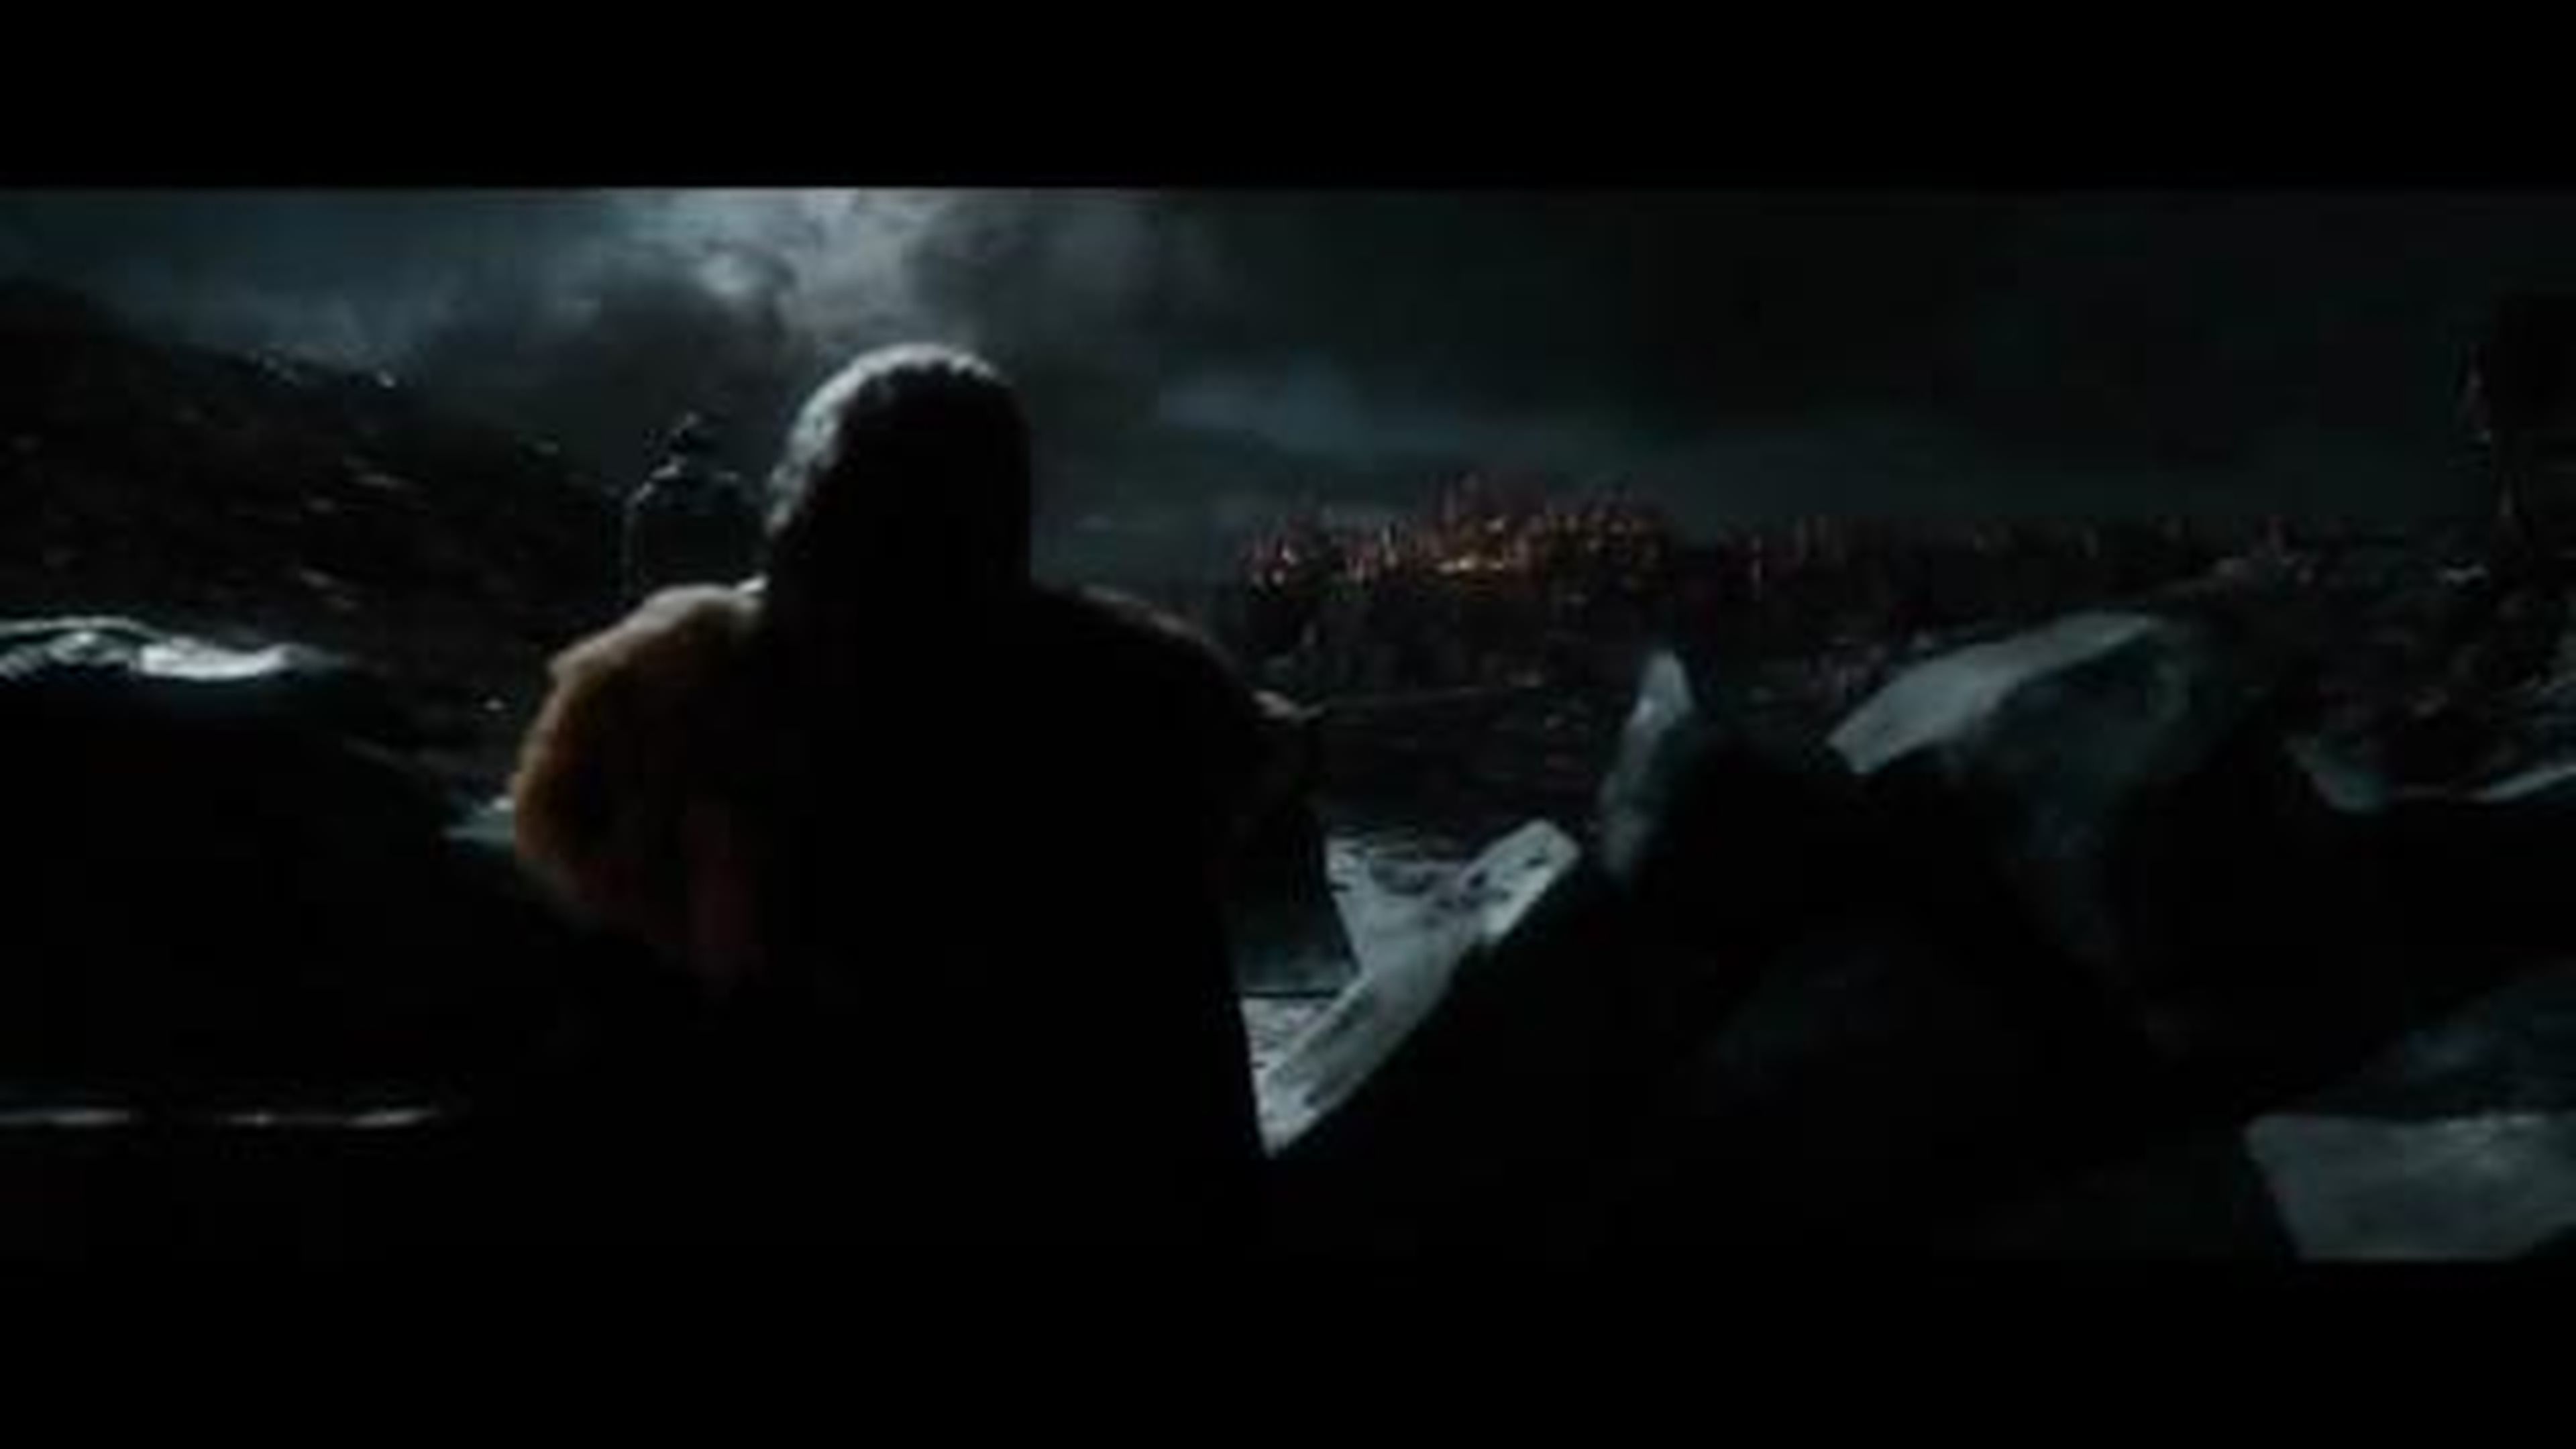 The Hobbit III: The Battle of the Five Armies Extended Trailer (All Trailer Scenes)